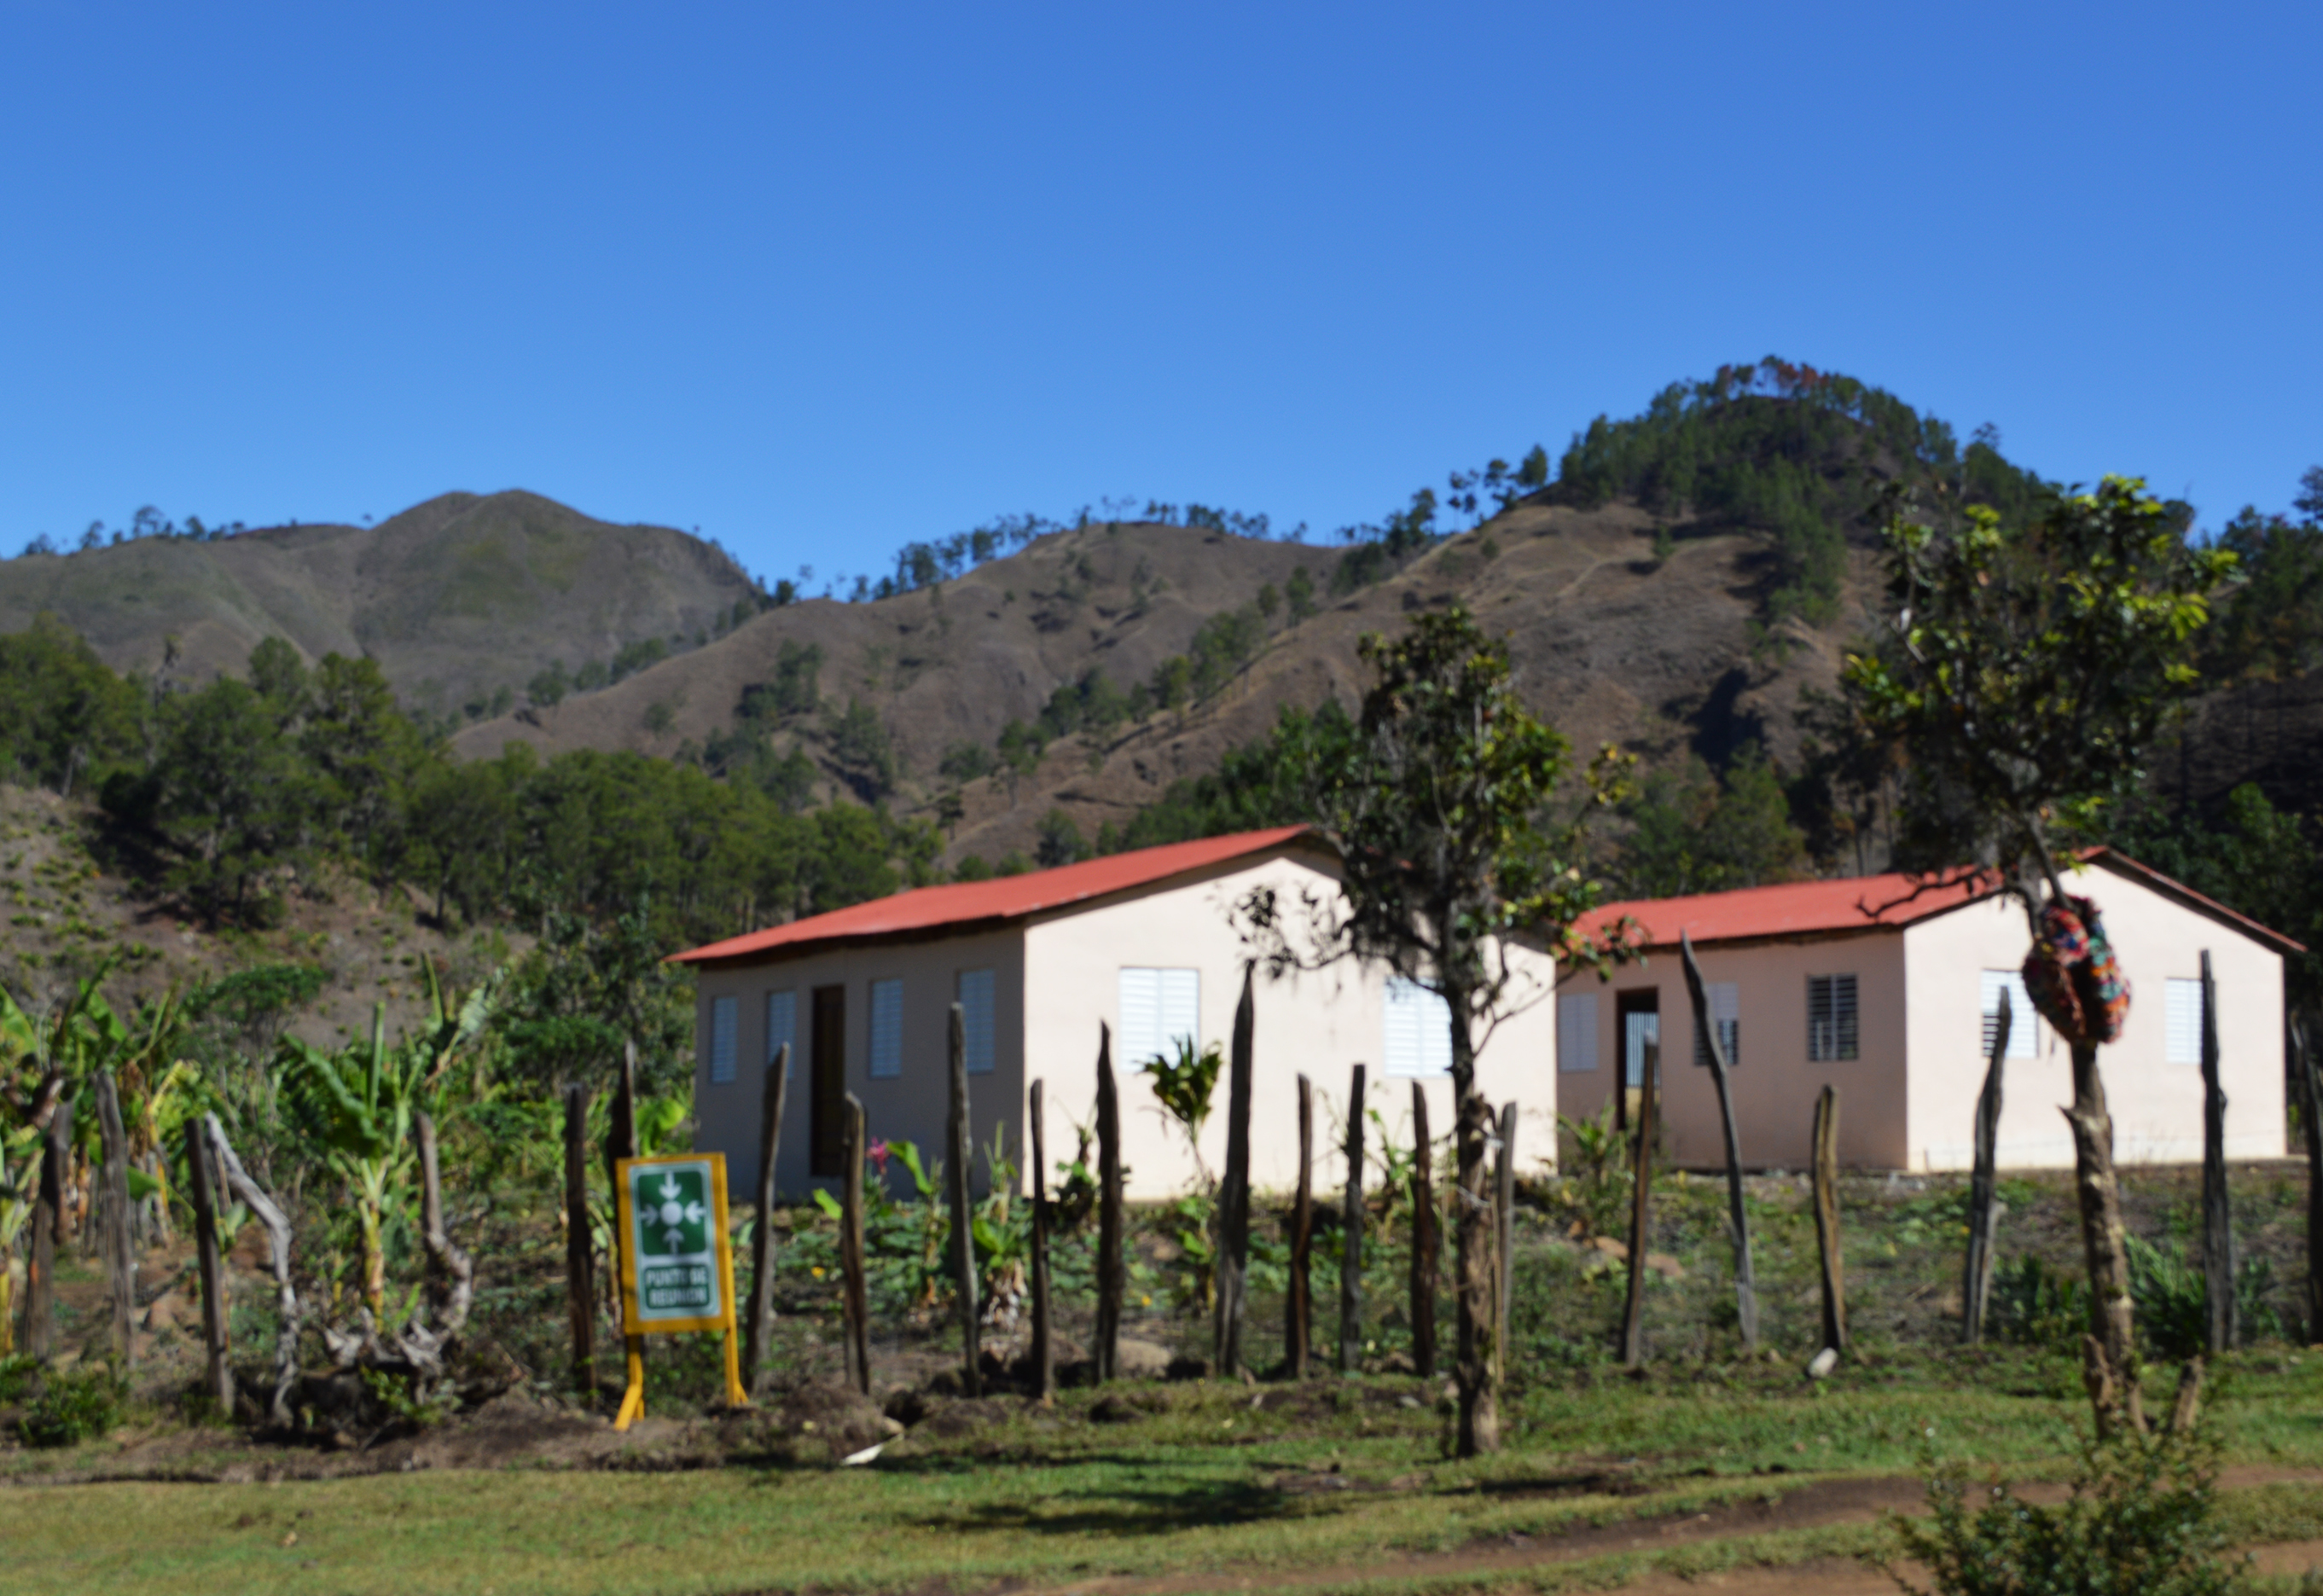 First Hondo Valle Primary School & Village Medical Clinic, built by GoldQuest 